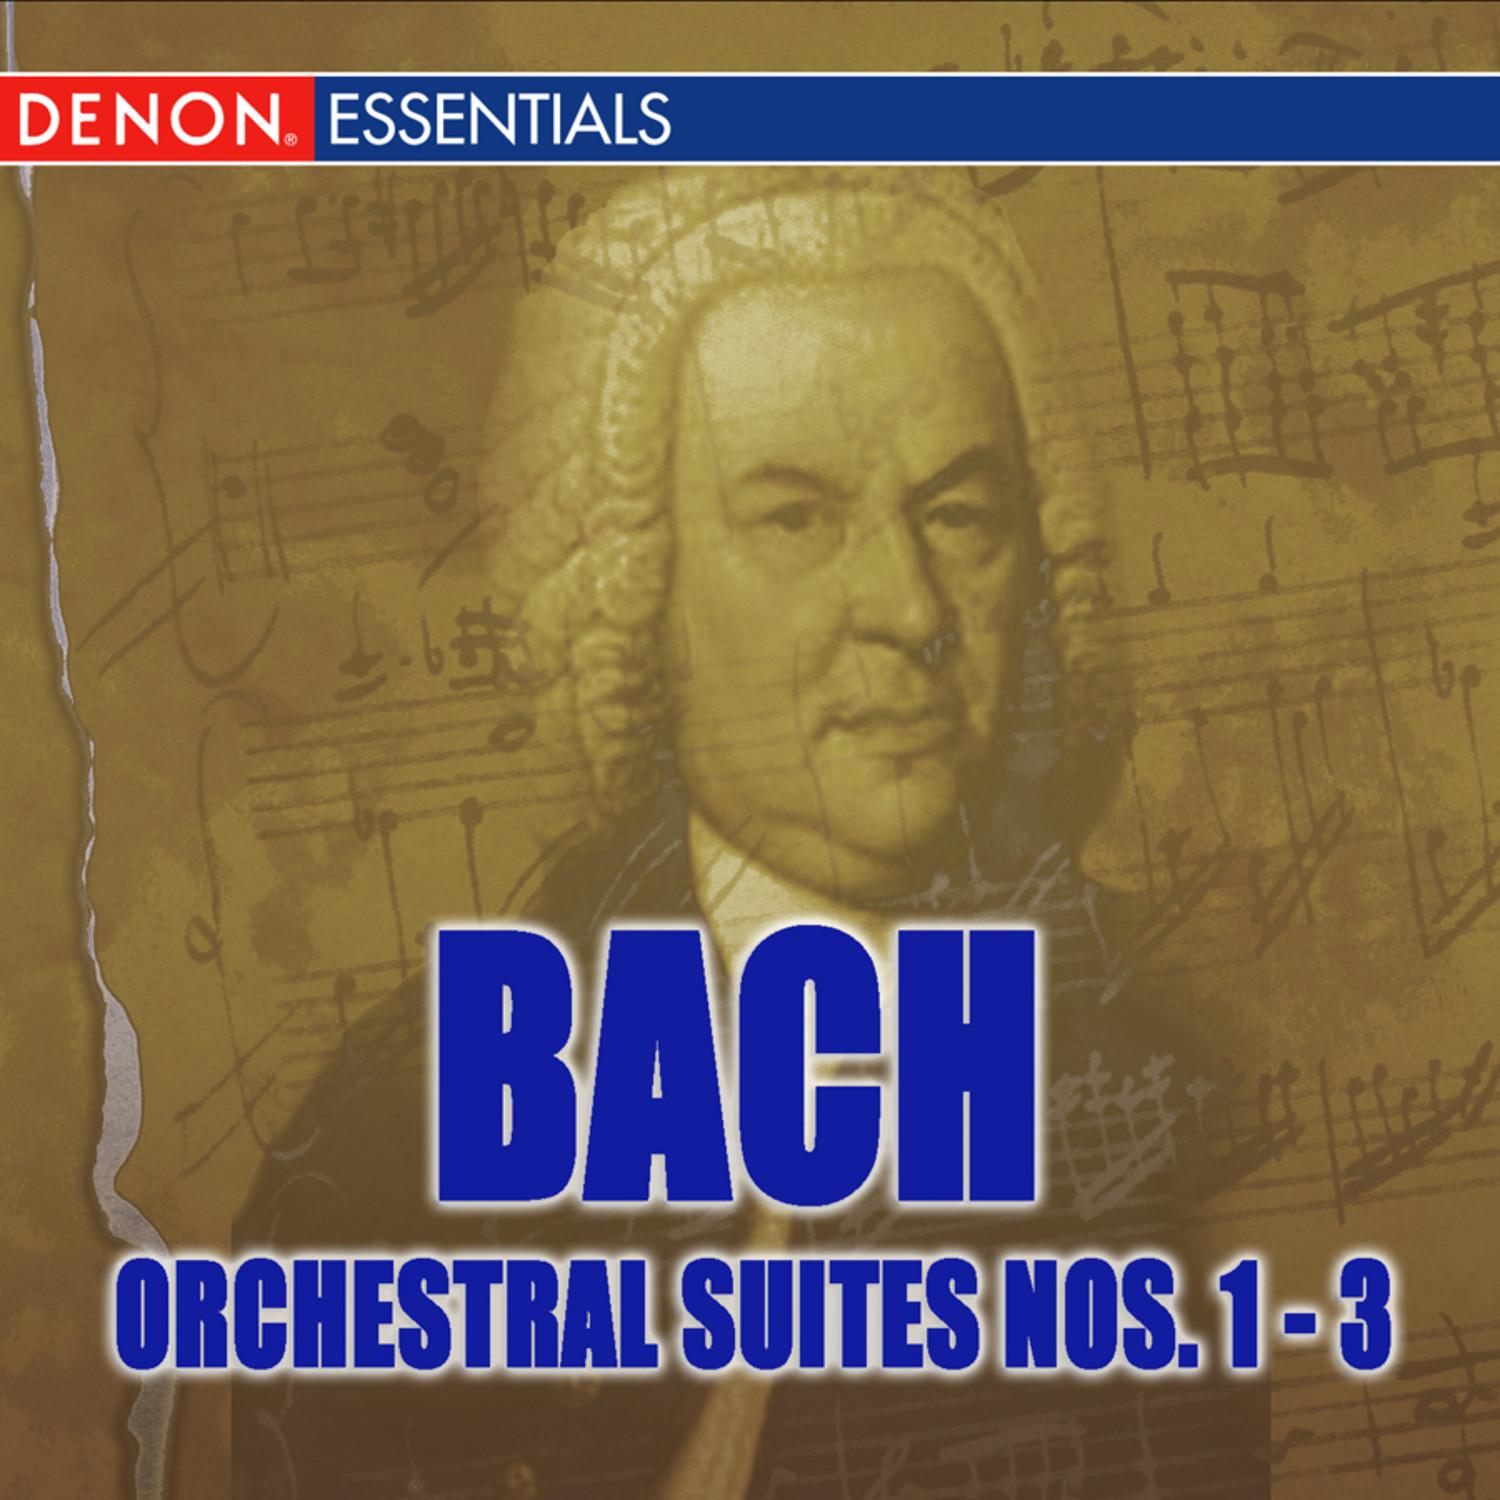 Suite for Orchestra No. 1 in C Major, BWV 1066: VI. Bourrees 1 & 2